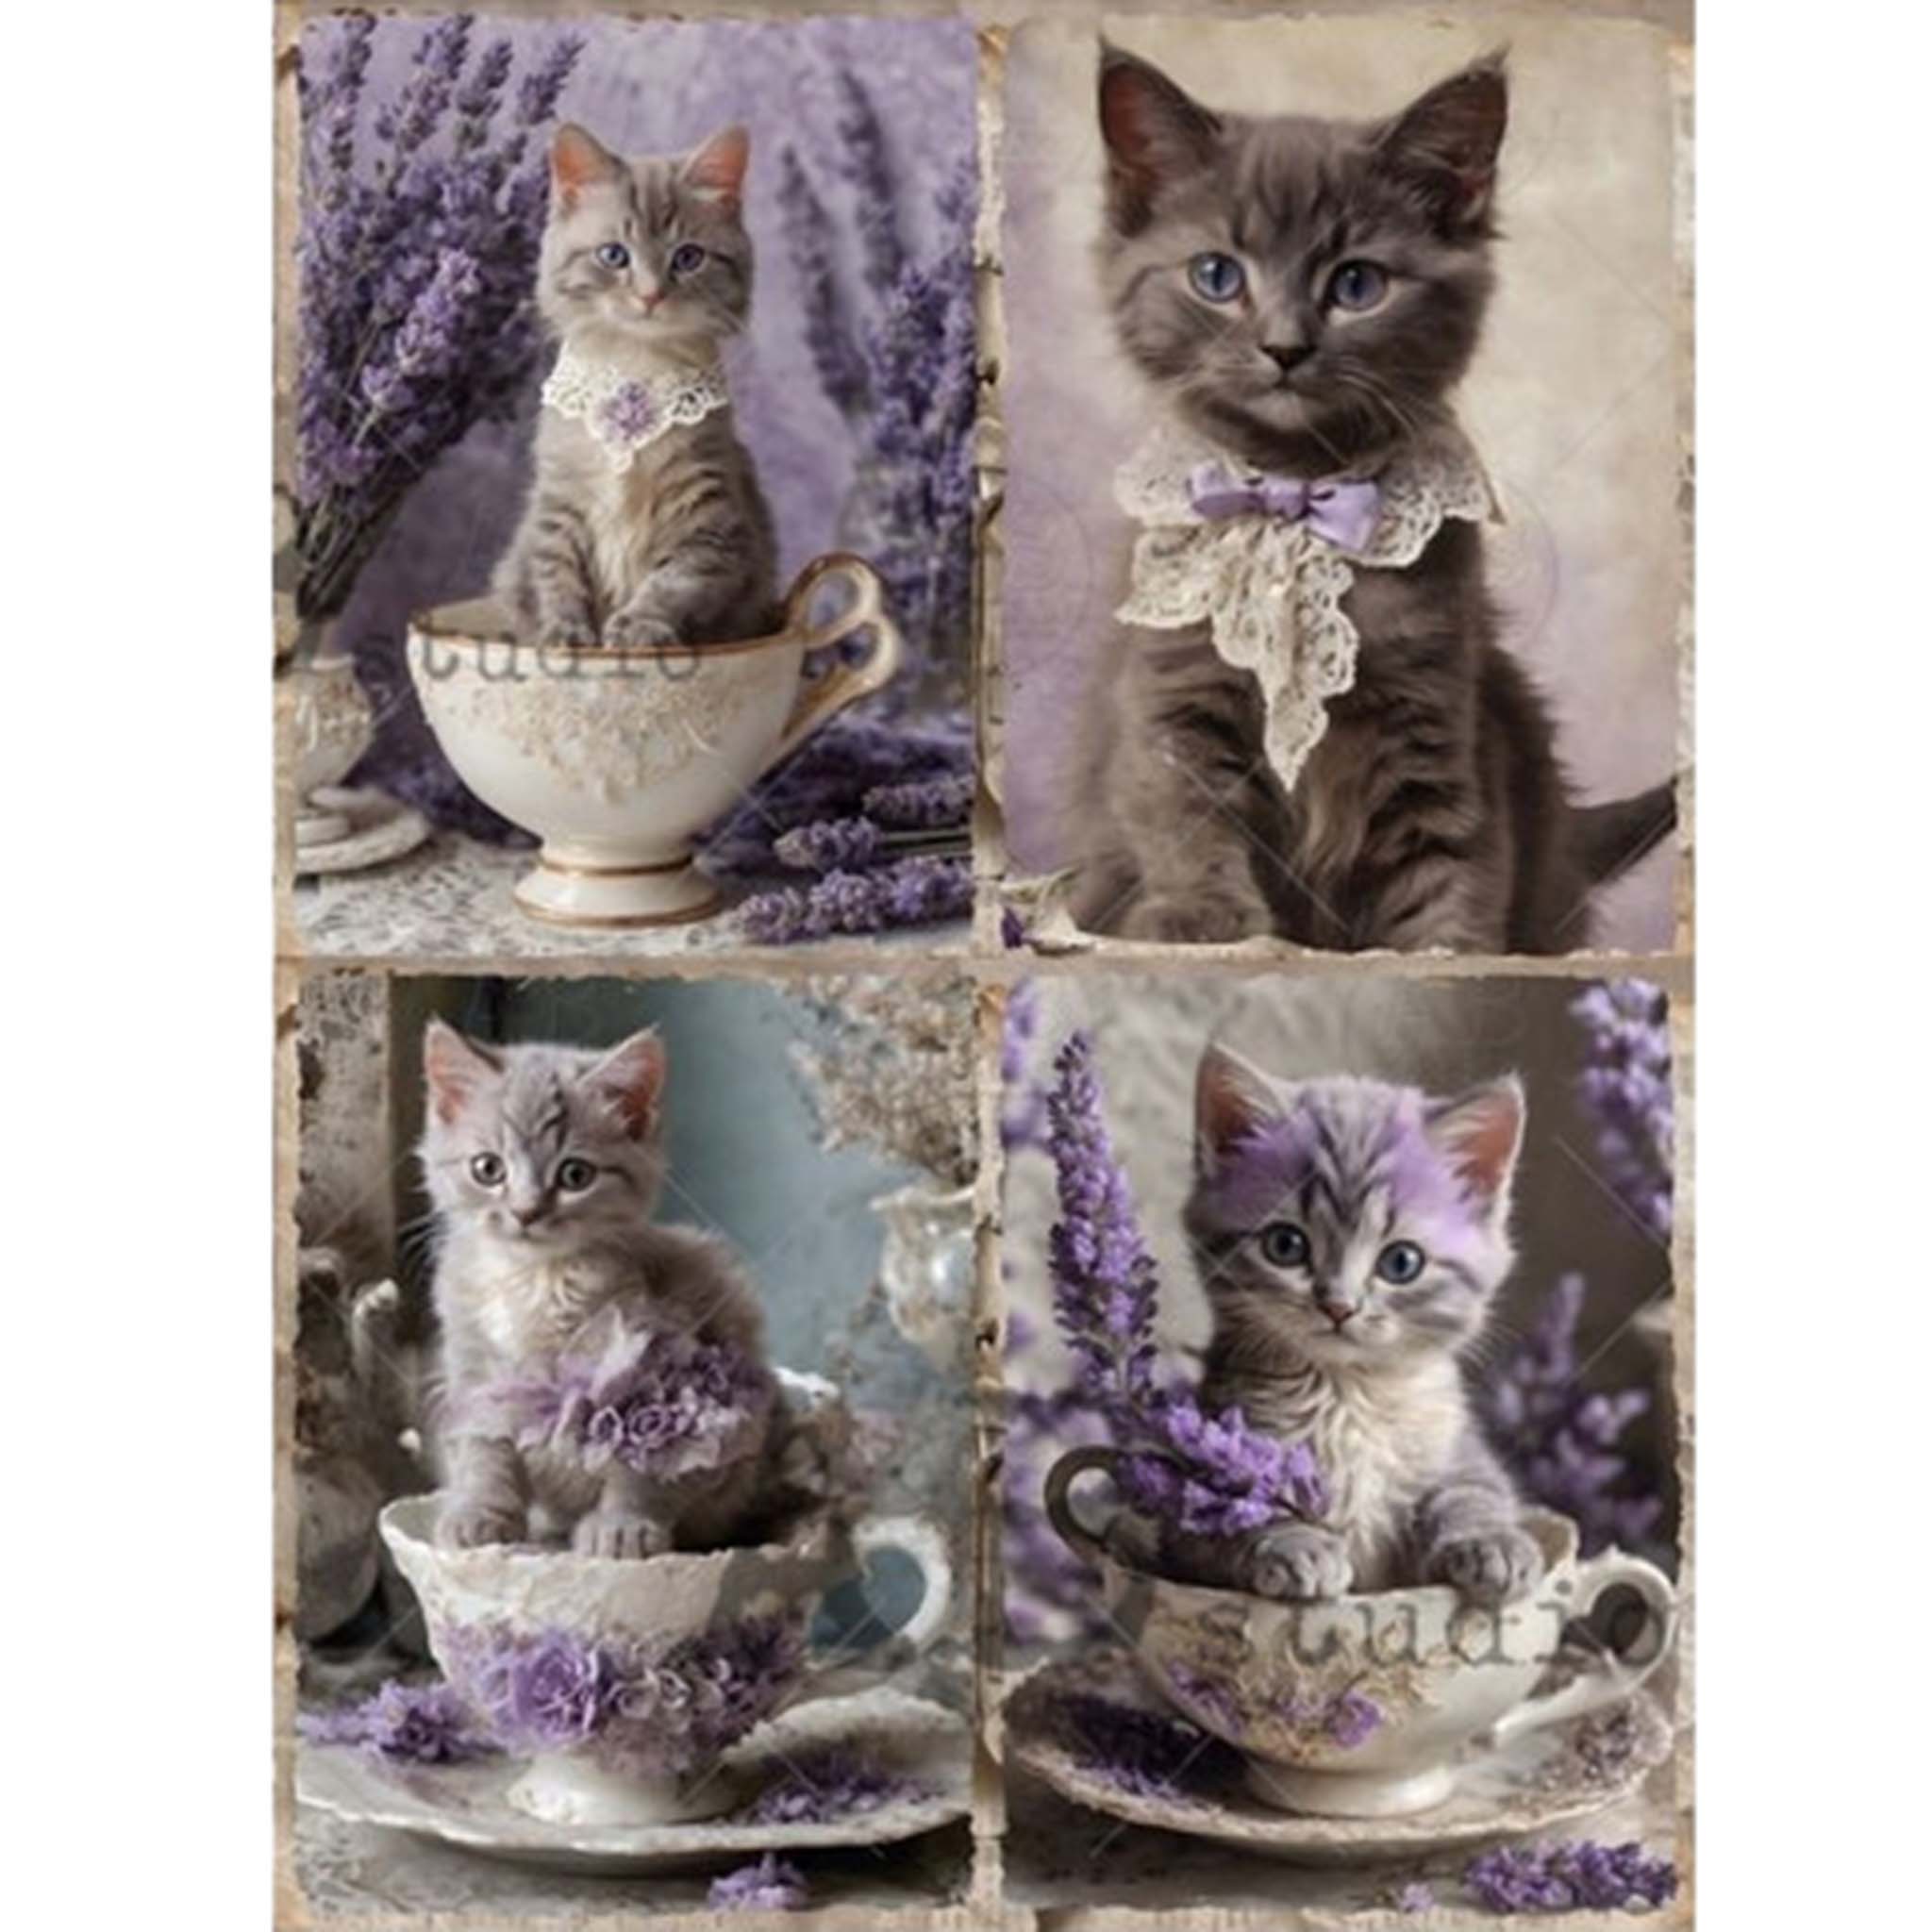 A4 rice paper that features 4 scenes of adorable gray kittens sitting in teacups with lavender flowers. White borders are on the sides.